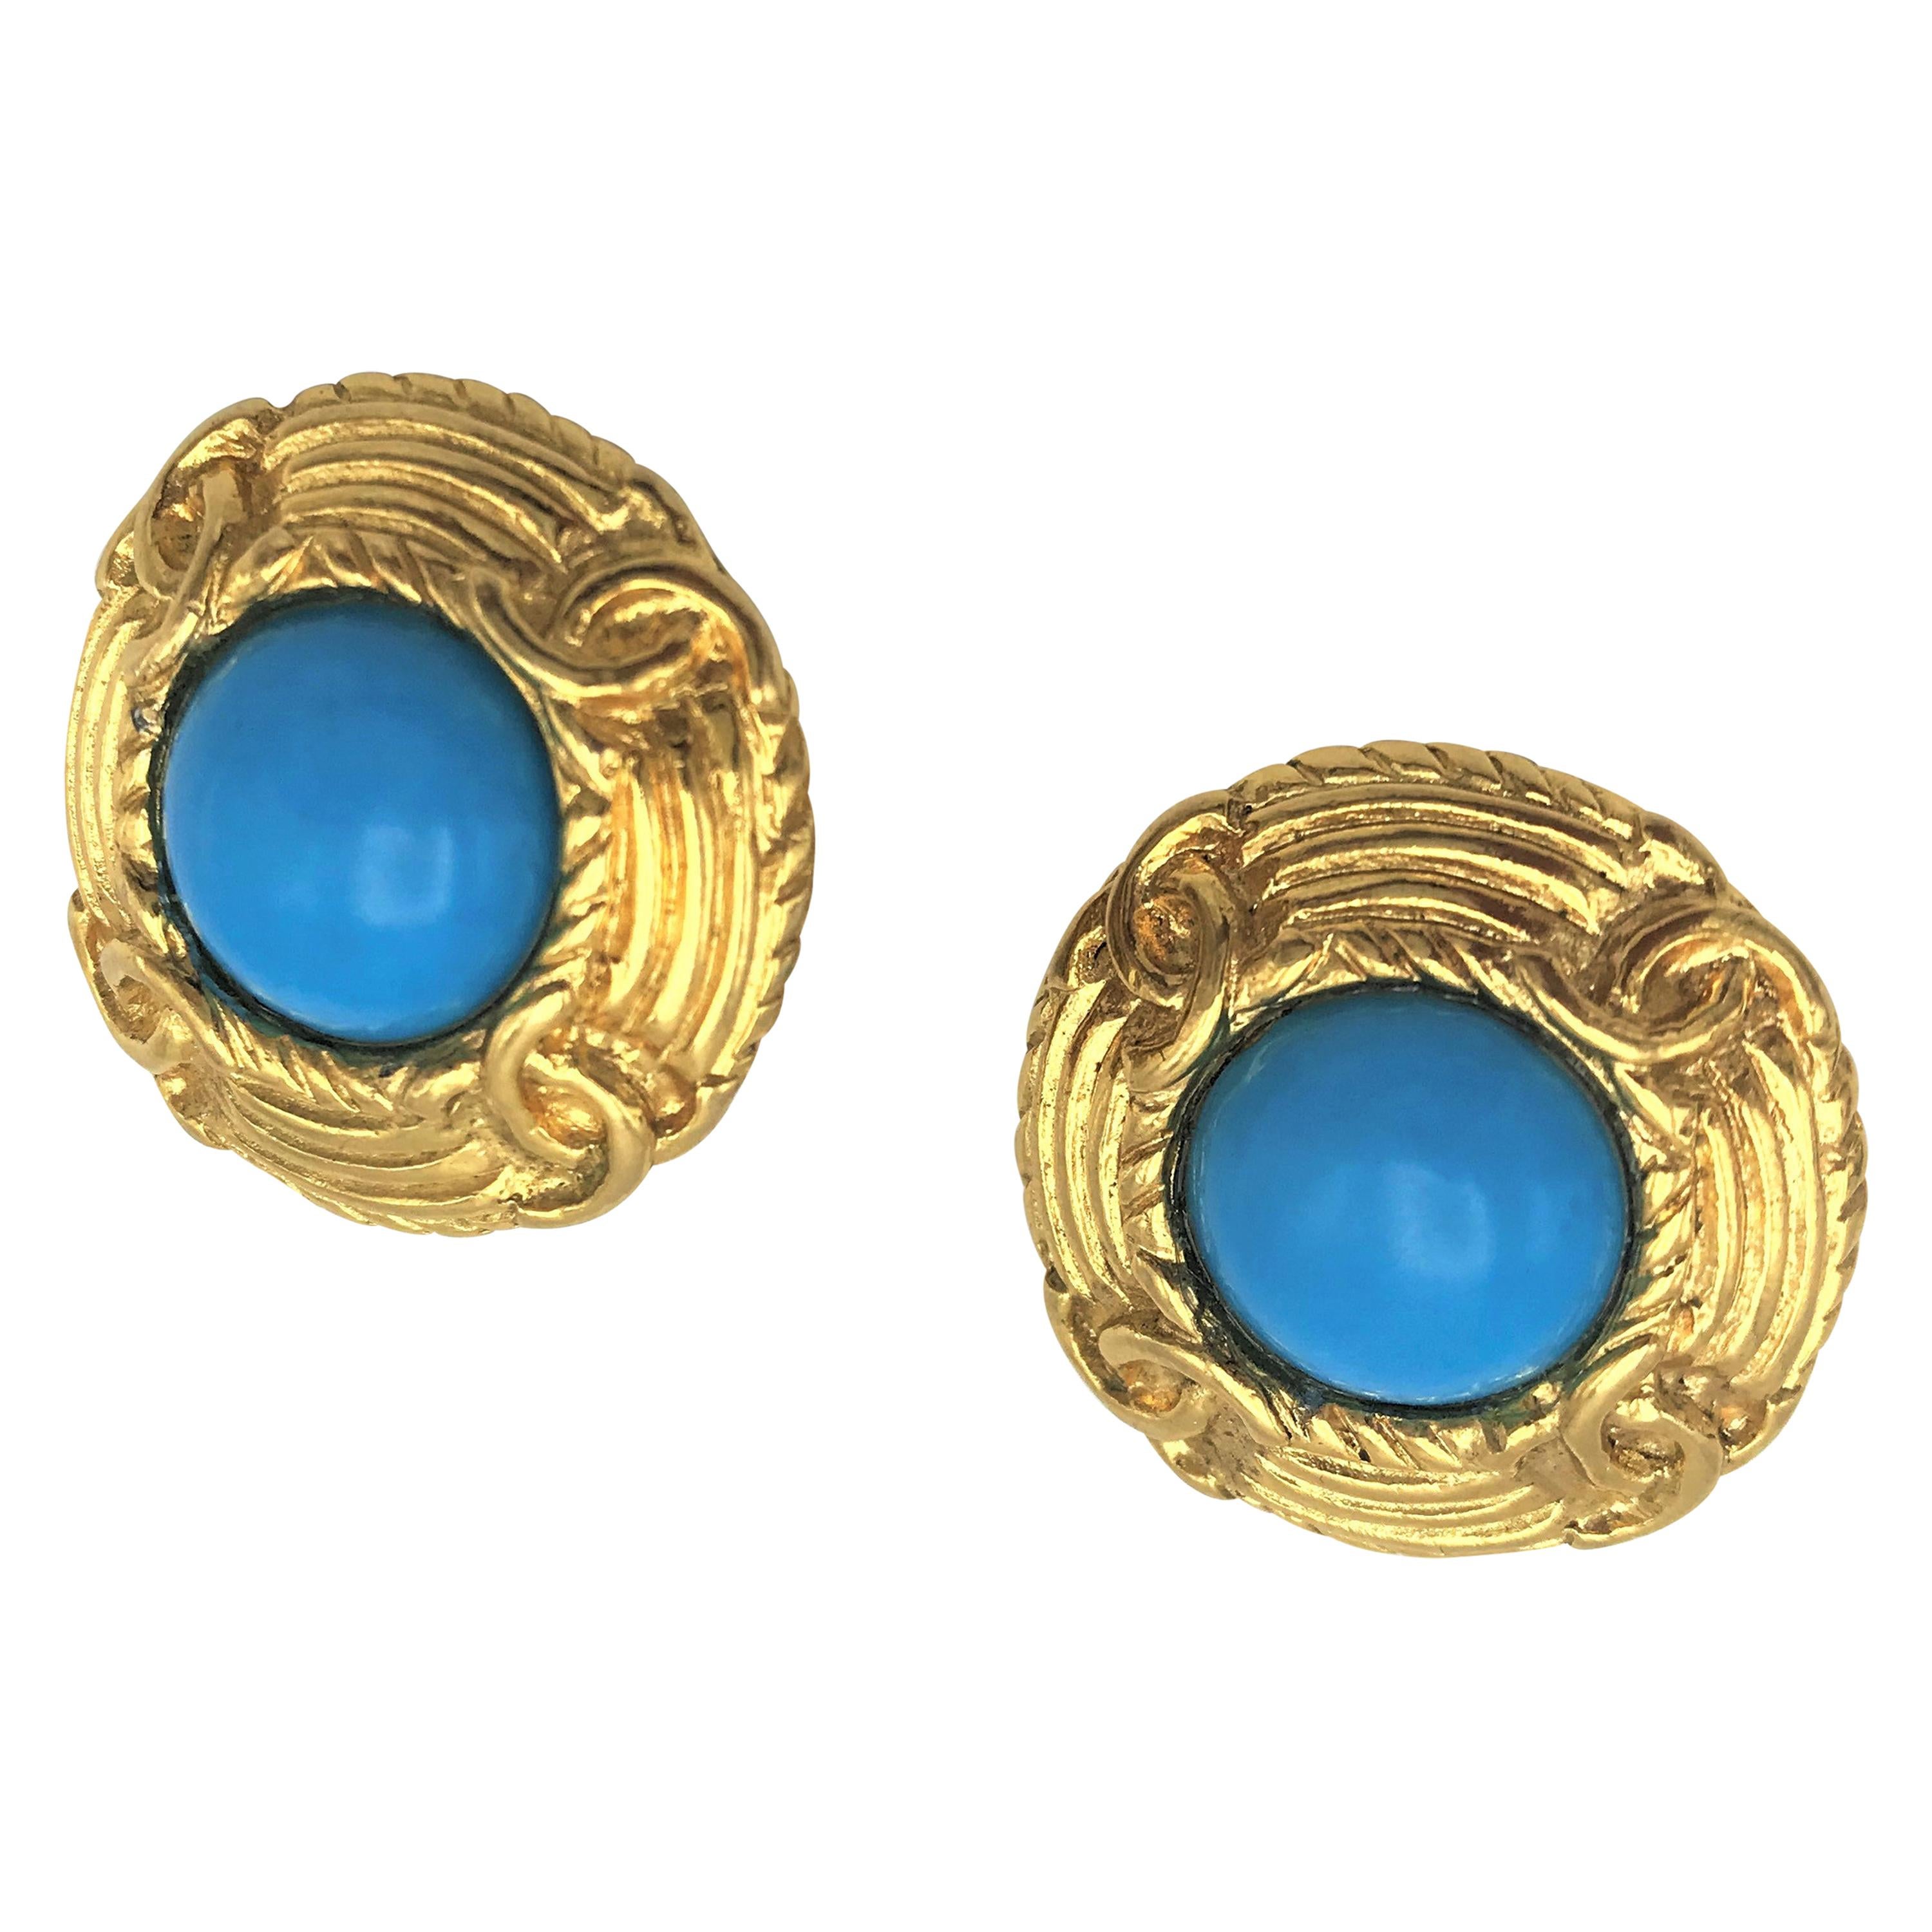  Vintage Chanel clip-on earring Paris  70/80s  gold plate,  turquoise Cabochon